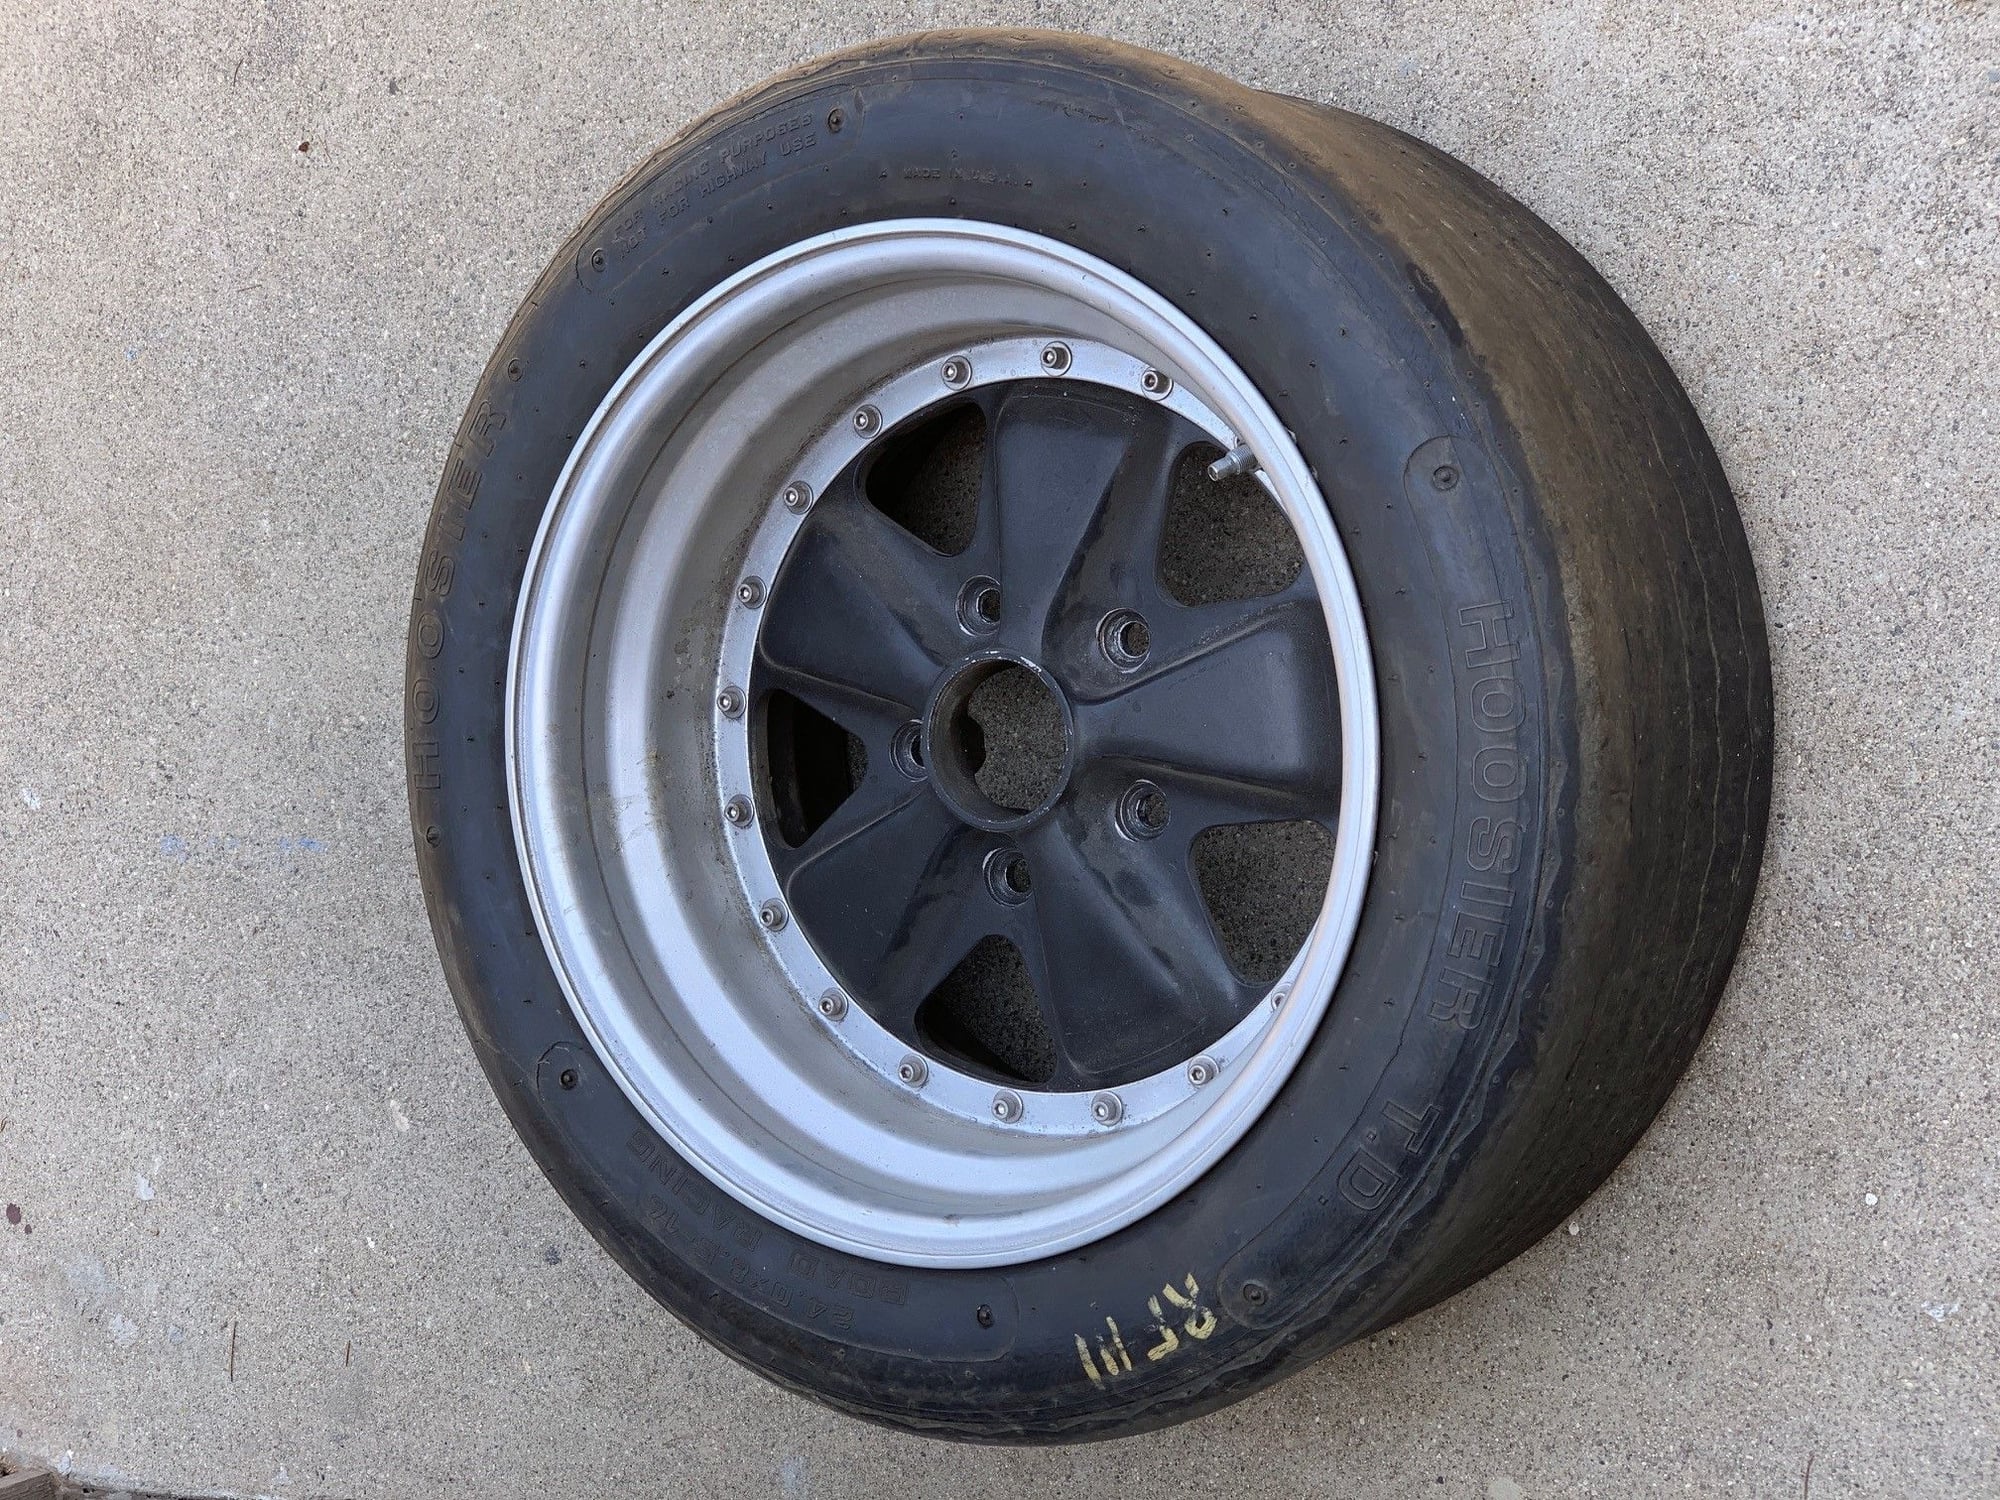 Wheels and Tires/Axles - set of FUCHS racing Wheels - Used - 1973 to 1978 Porsche 911 - Los Angeles, CA 90024, United States